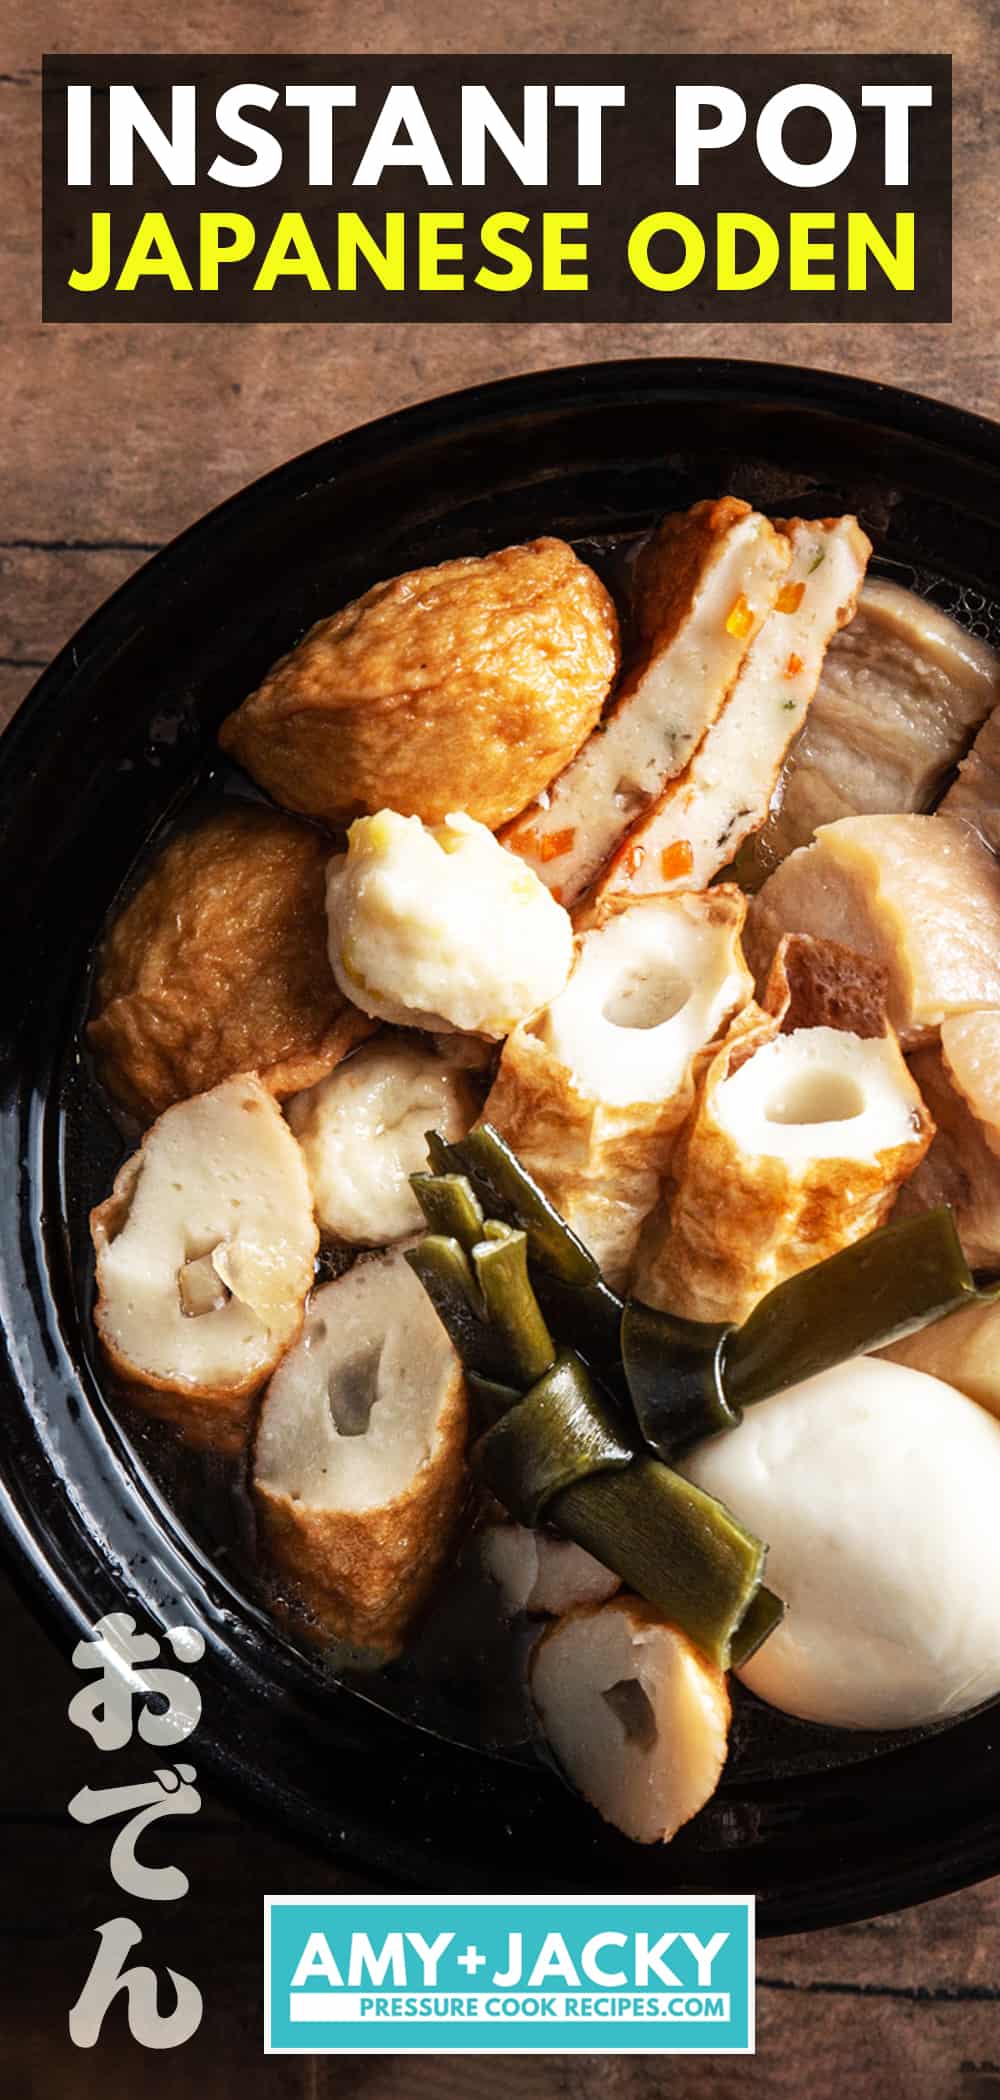 How to make Oden (おでん): Easy to make Japanese Homemade Oden Recipe! Comforting Hot Pot with tasty fish cakes, daikon, boiled eggs, kombu, pork belly immersed in flavorful dashi broth.